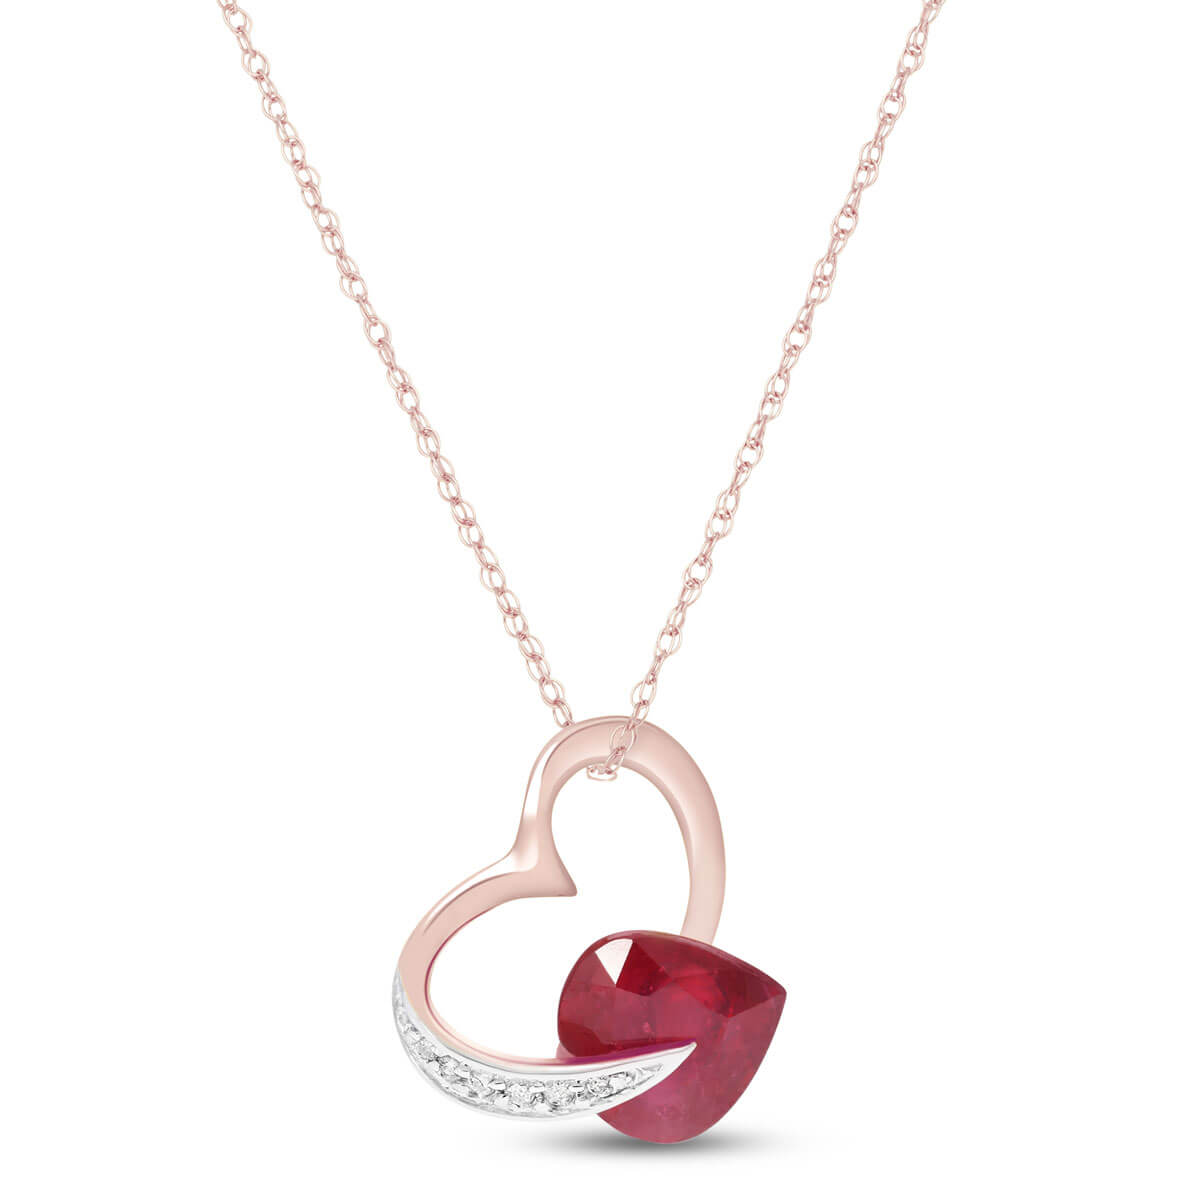 Ruby & Diamond Heart Pendant Necklace in 9ct Rose Gold